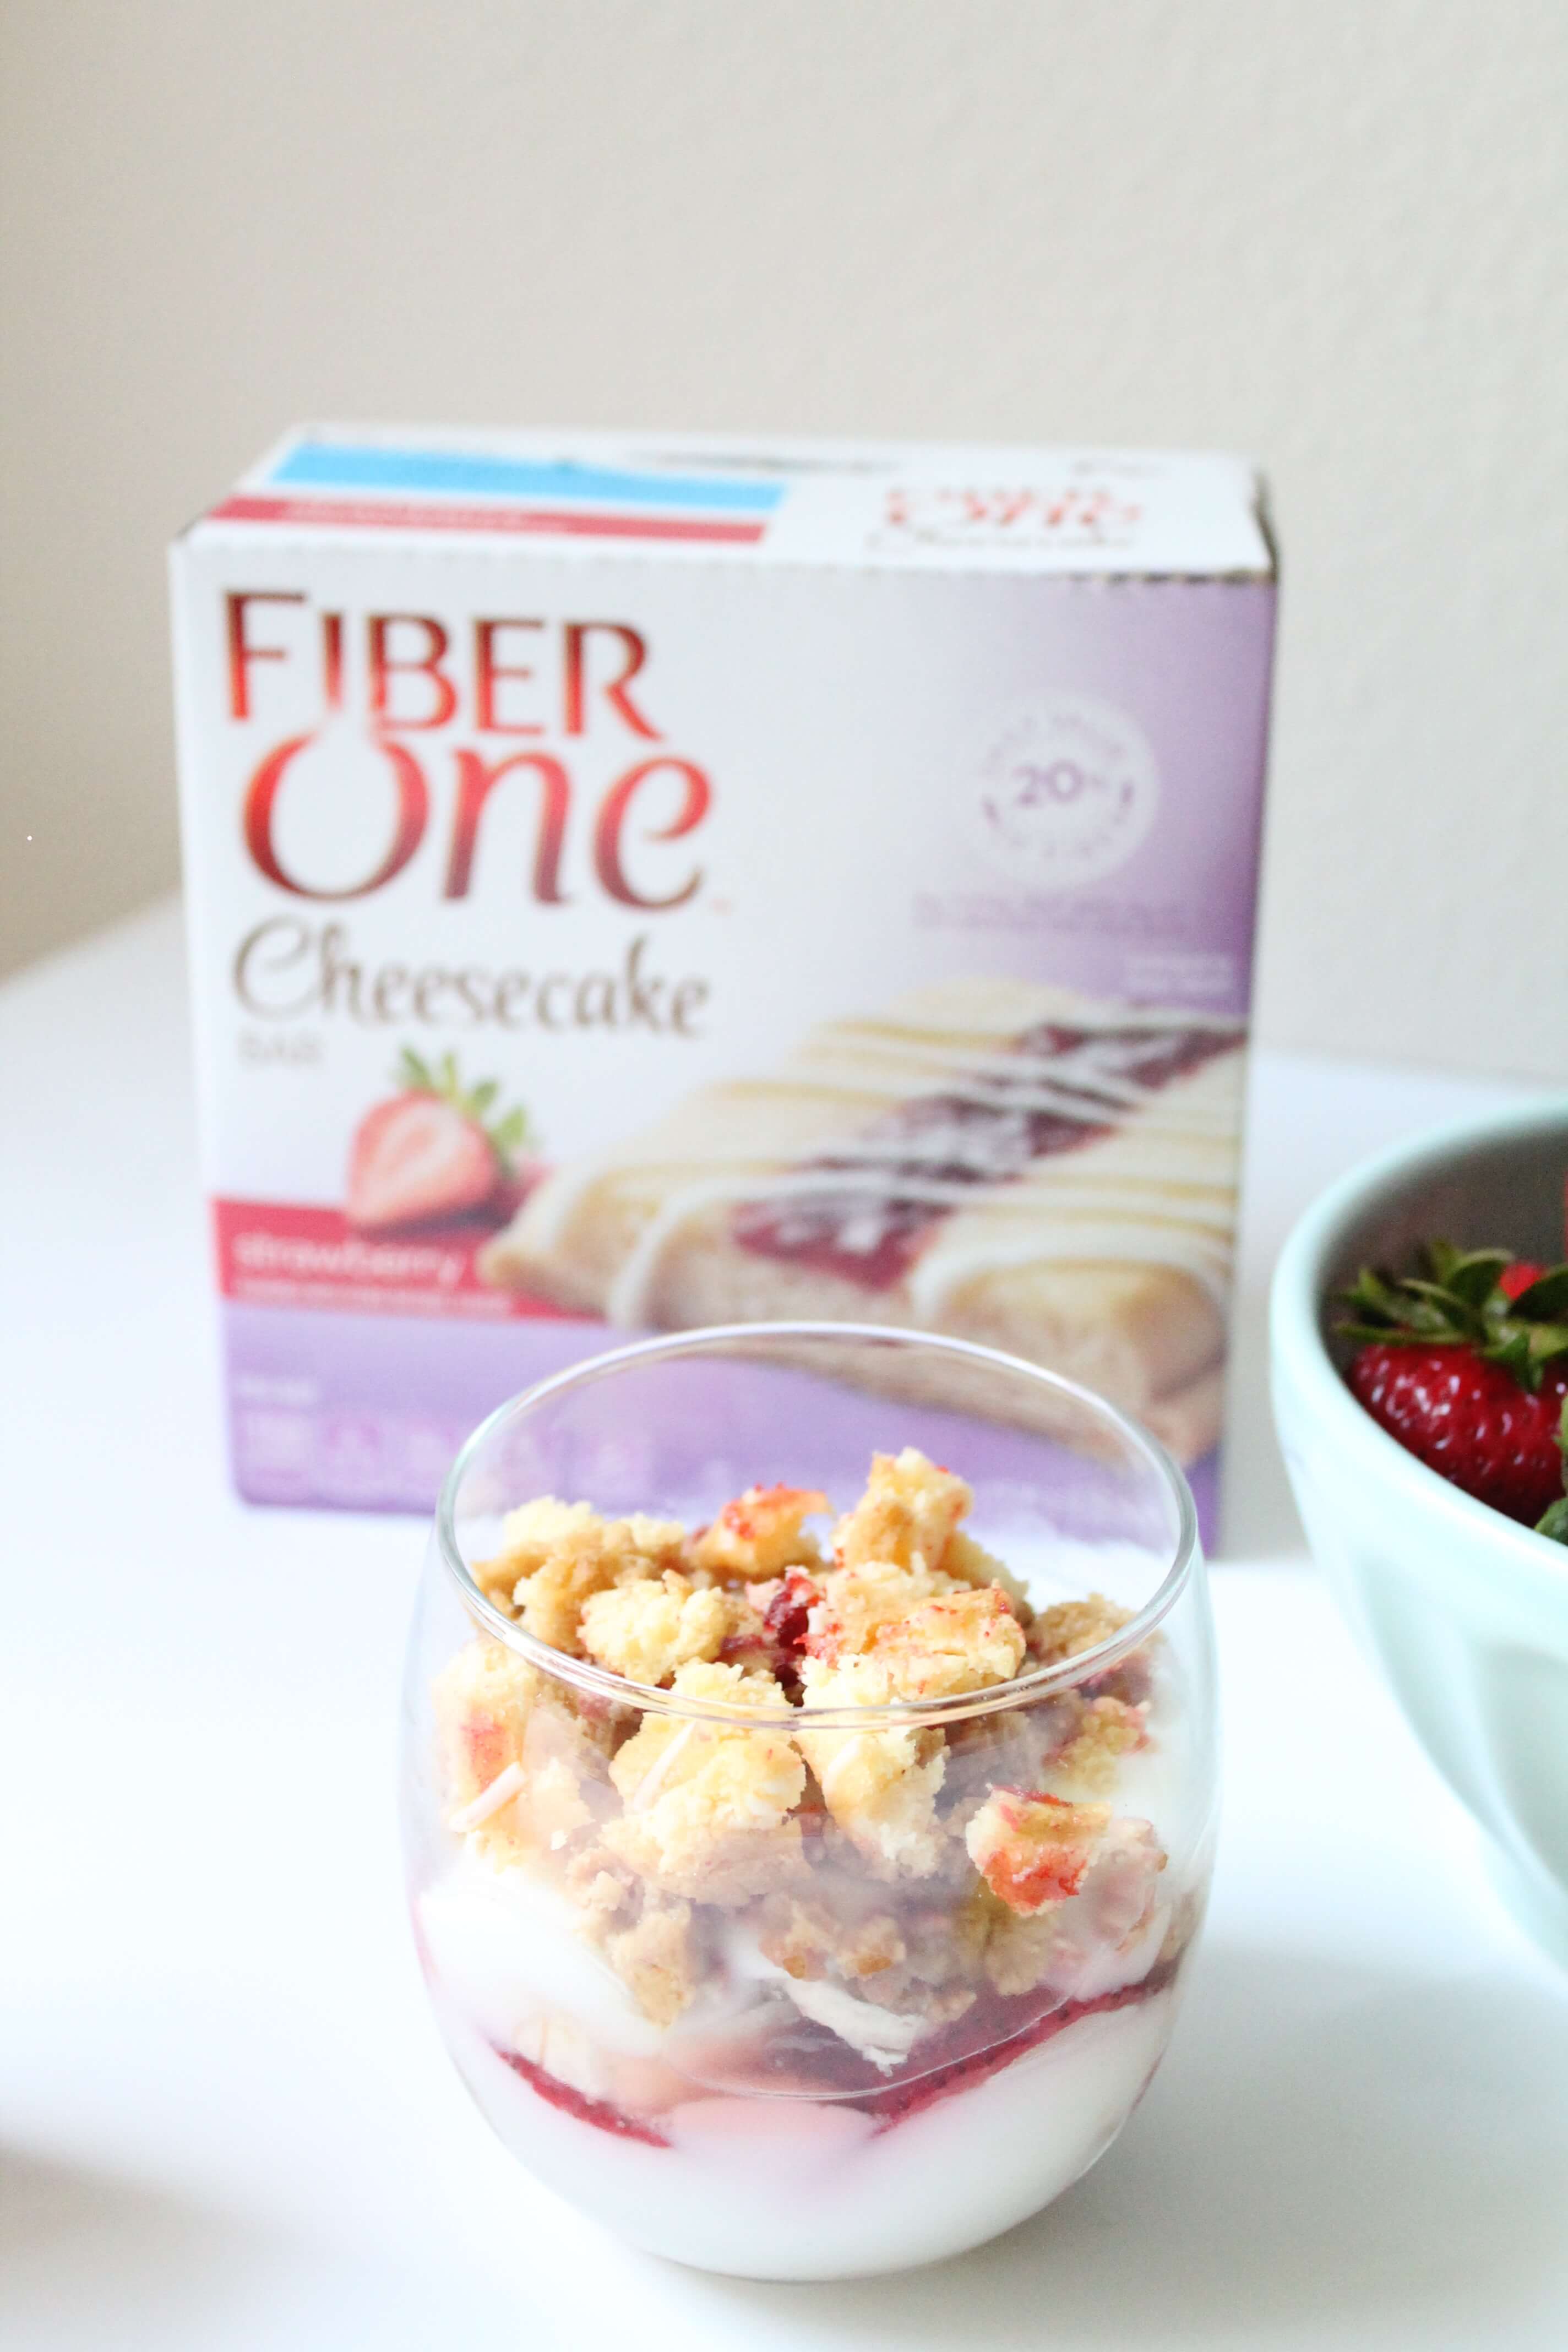 Delicious Fiber One Strawberry Cheesecake Parfait. Healthy and easy dessert! Indulge without the guilt!